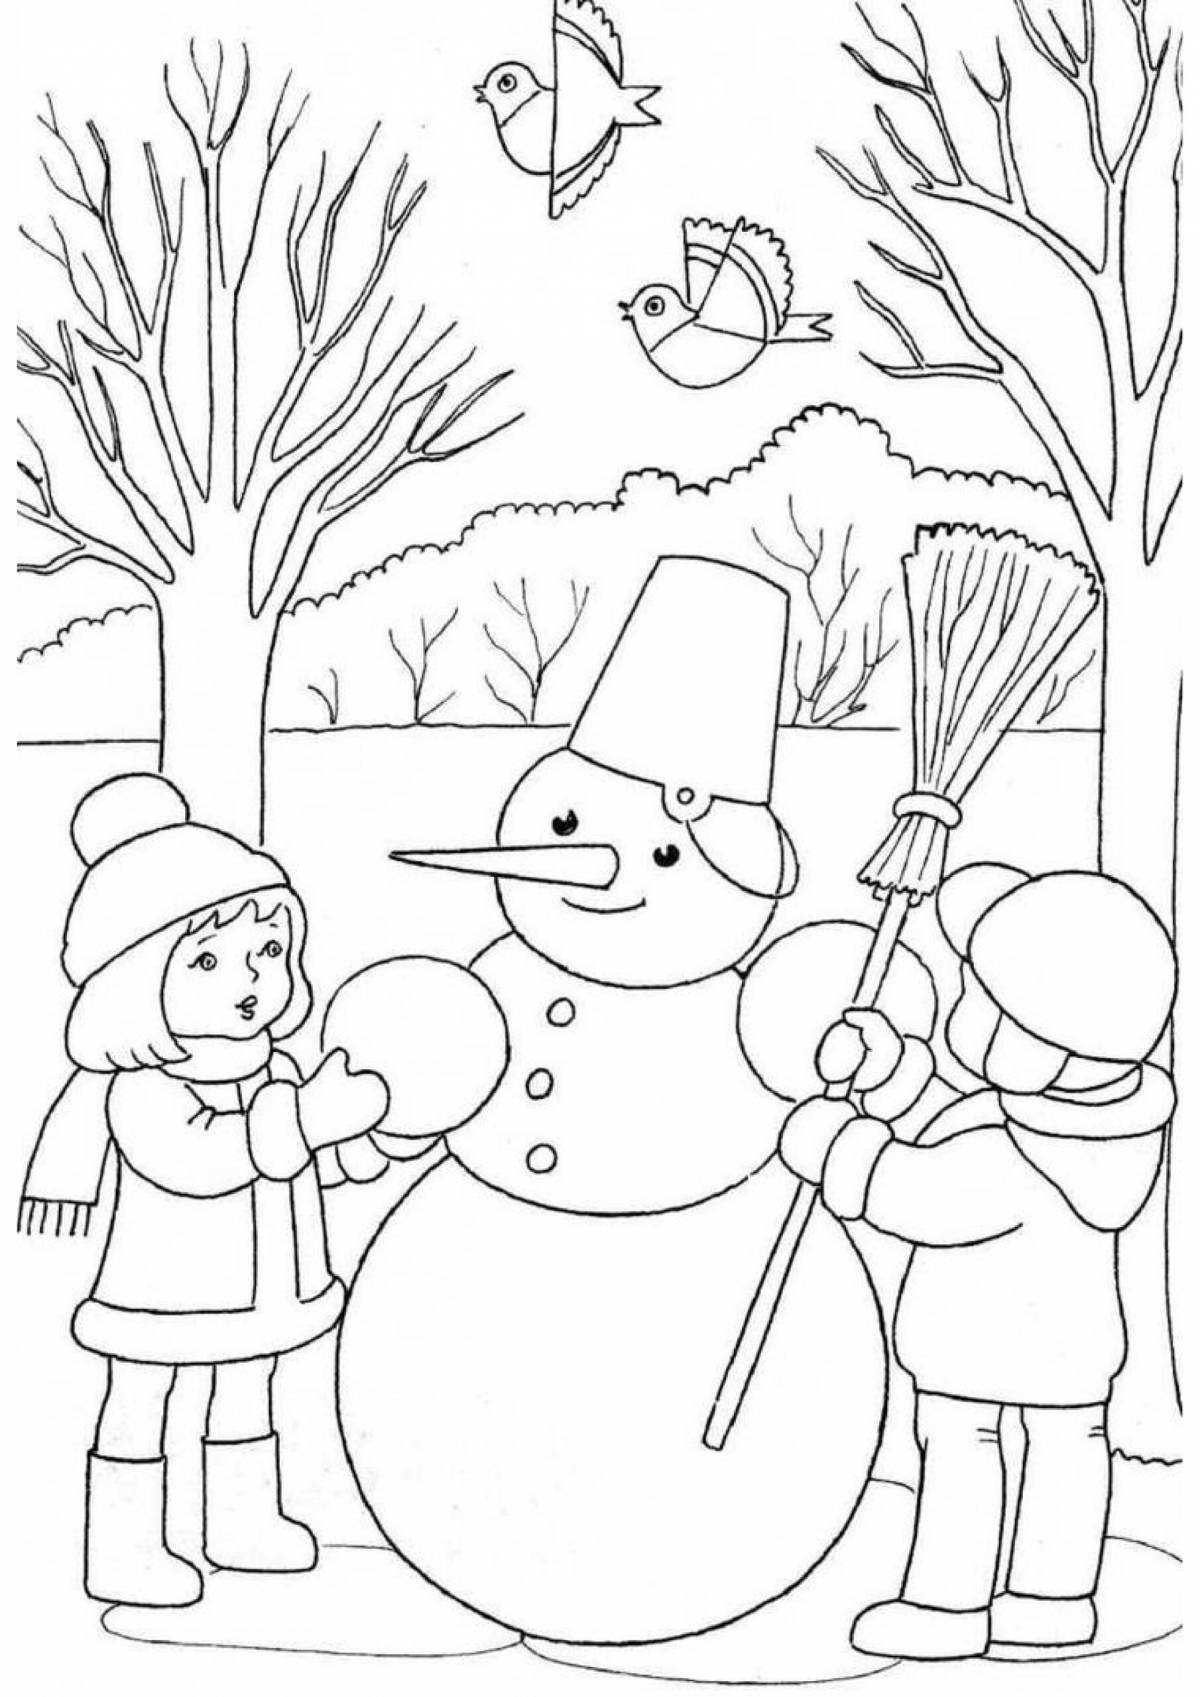 Amazing winter coloring book